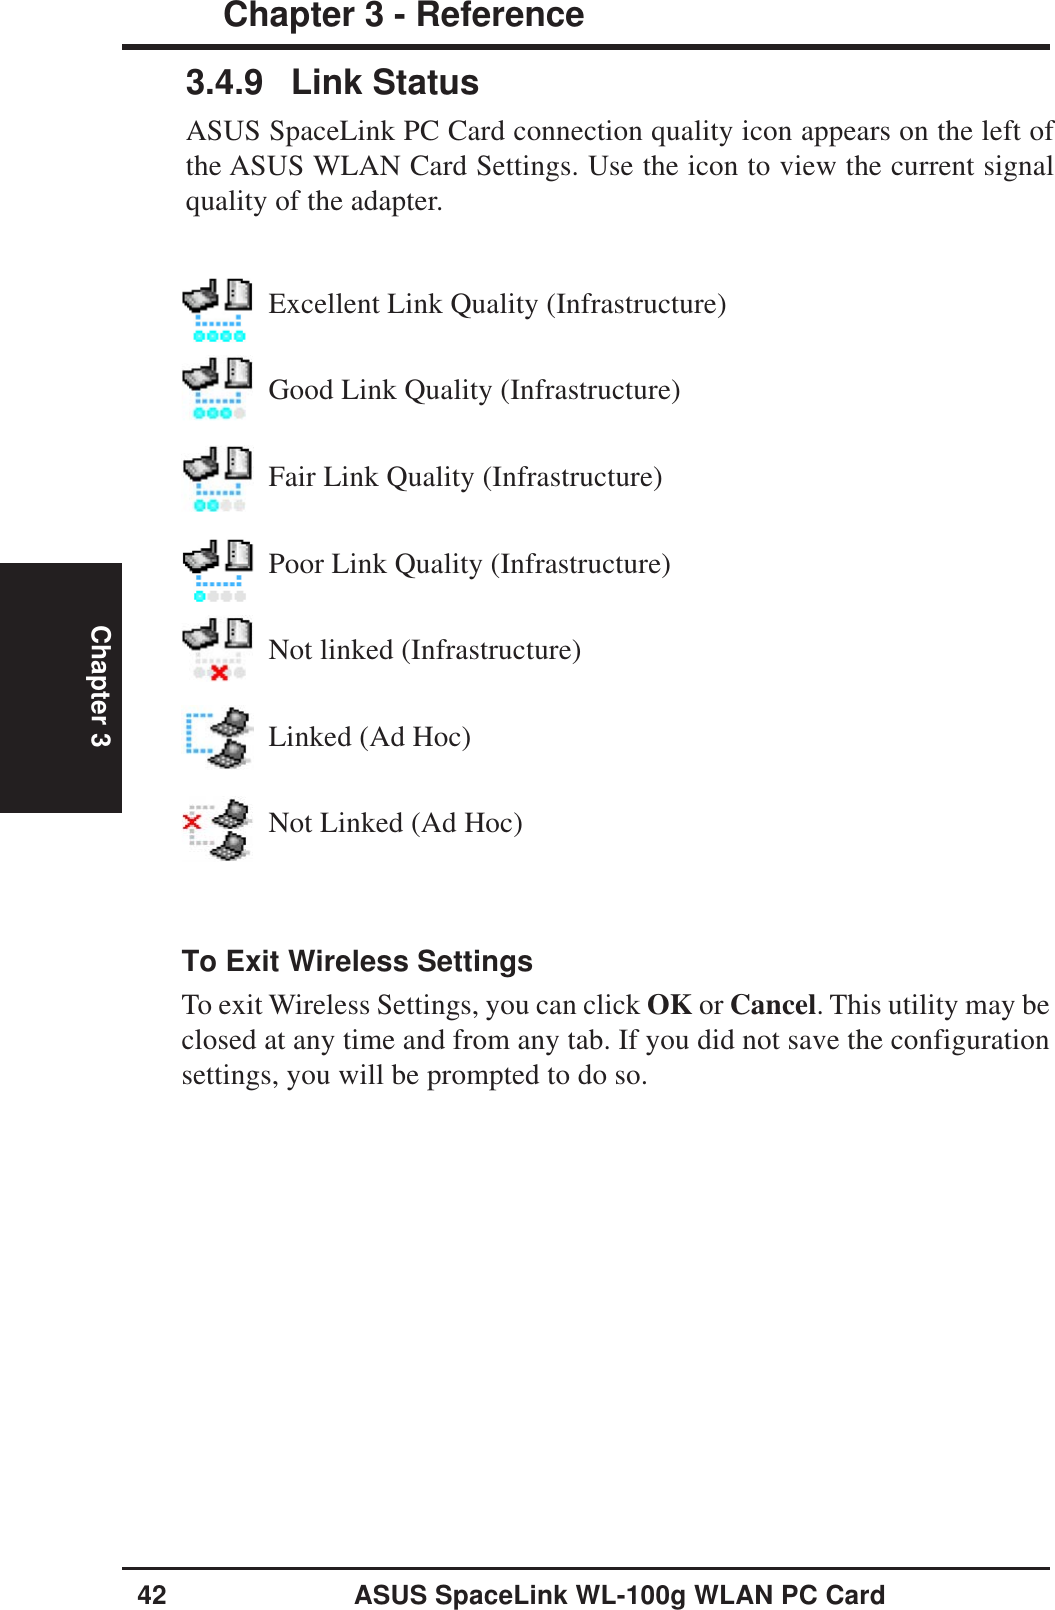 42 ASUS SpaceLink WL-100g WLAN PC CardChapter 3 - ReferenceChapter 3To Exit Wireless SettingsTo exit Wireless Settings, you can click OK or Cancel. This utility may beclosed at any time and from any tab. If you did not save the configurationsettings, you will be prompted to do so.3.4.9 Link StatusASUS SpaceLink PC Card connection quality icon appears on the left ofthe ASUS WLAN Card Settings. Use the icon to view the current signalquality of the adapter.Excellent Link Quality (Infrastructure)Good Link Quality (Infrastructure)Fair Link Quality (Infrastructure)Poor Link Quality (Infrastructure)Not linked (Infrastructure)Linked (Ad Hoc)Not Linked (Ad Hoc)